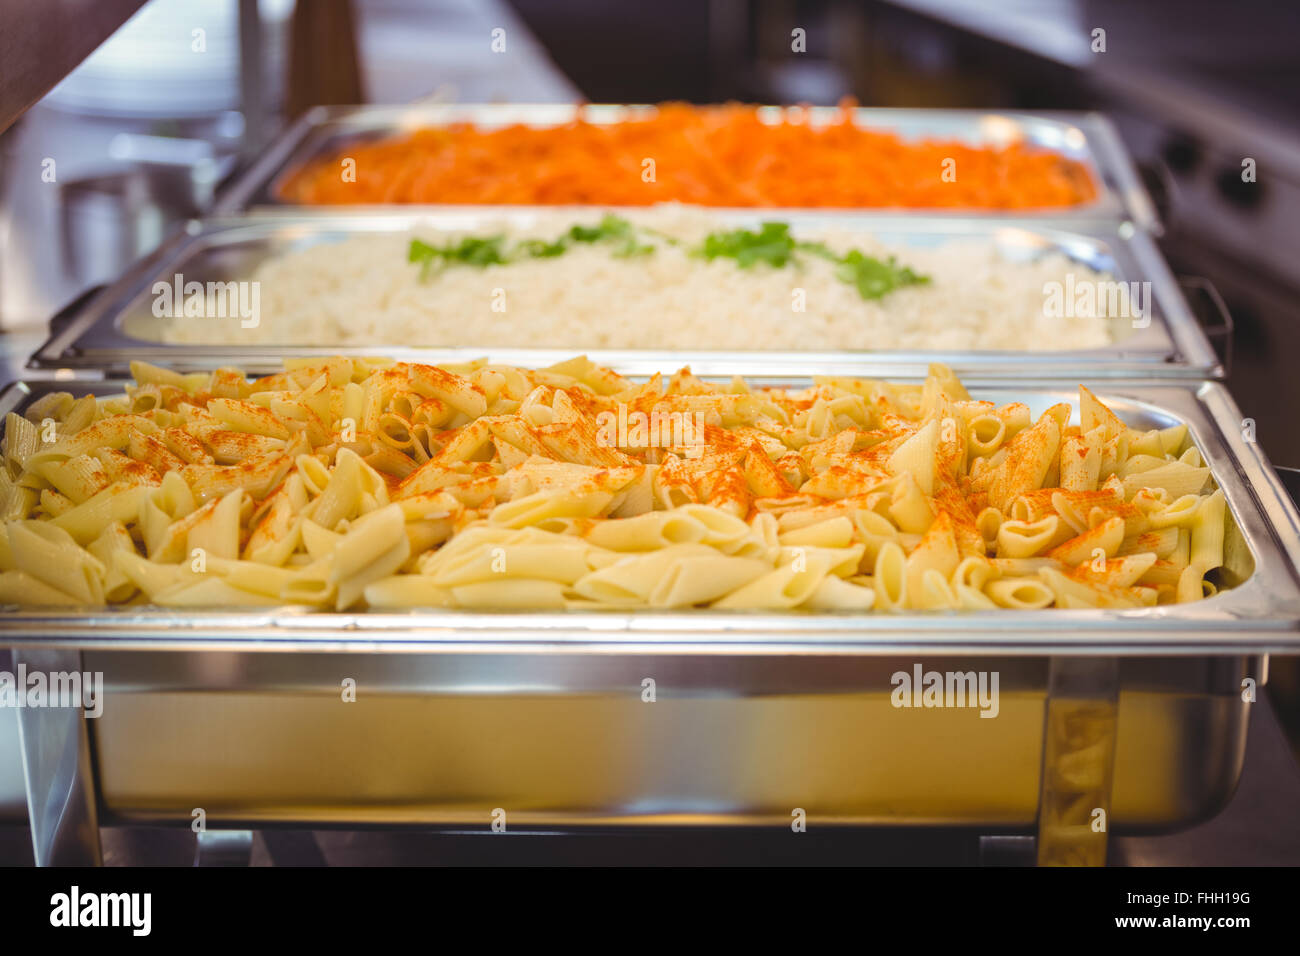 Serving dishes of potato and pasta Stock Photo